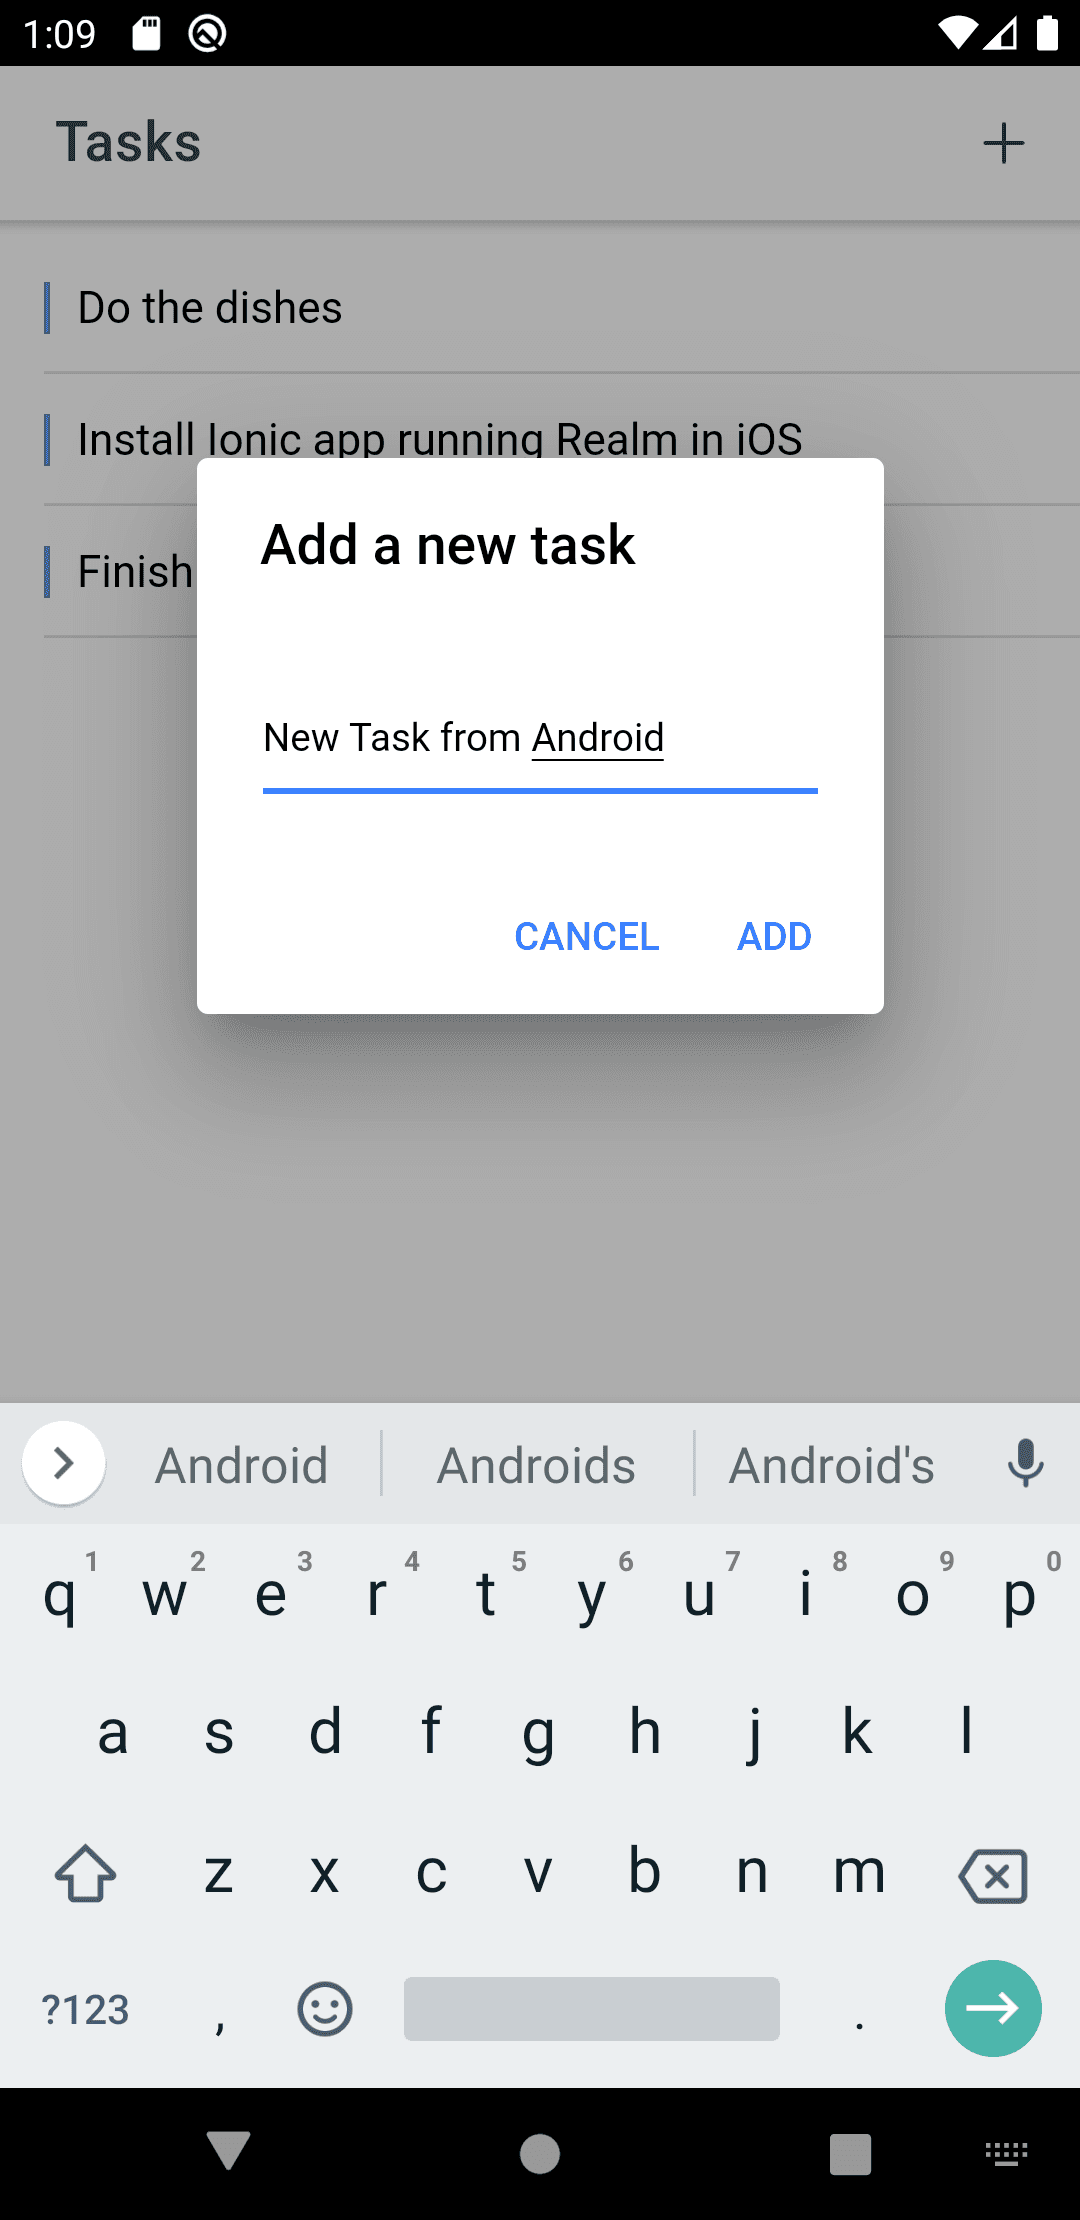 Adding a new task screen from Android, with “New Task from Android” typed in.